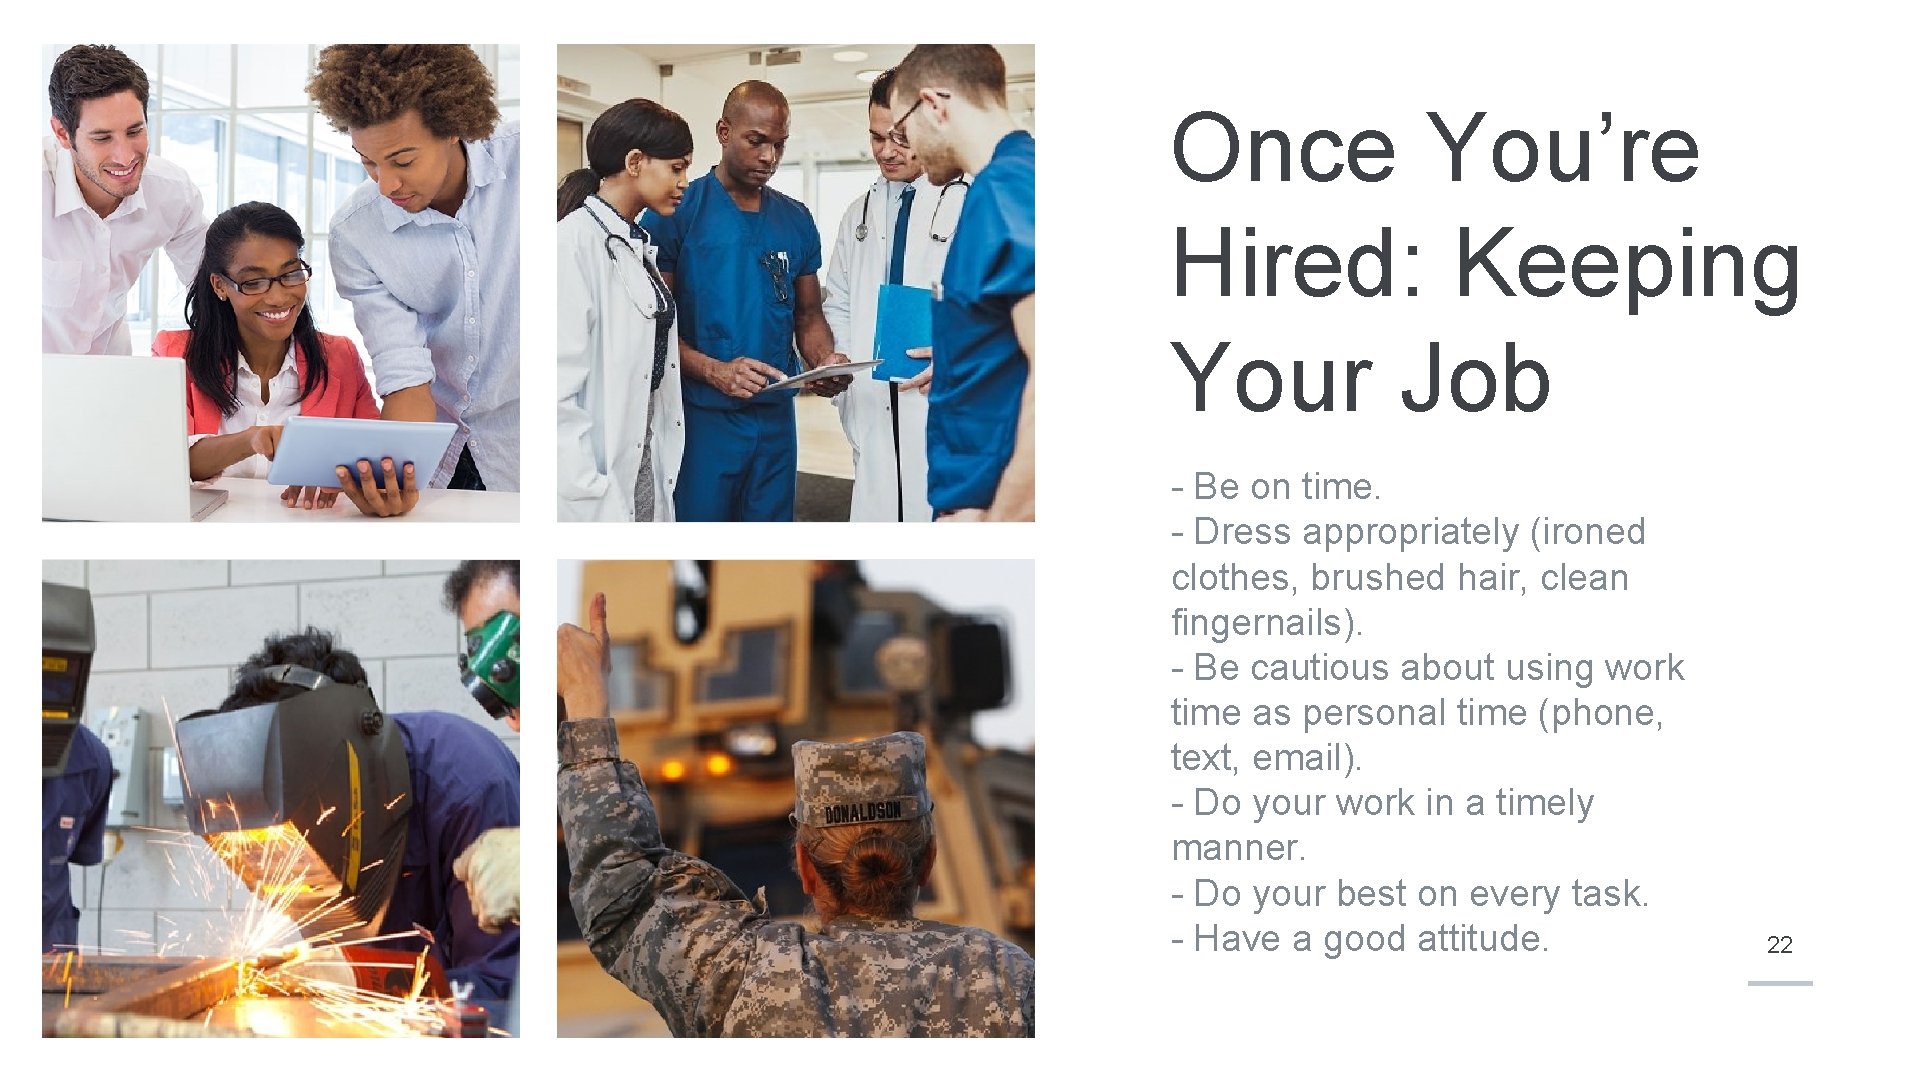 Once You’re Hired: Keeping Your Job - Be on time. - Dress appropriately (ironed